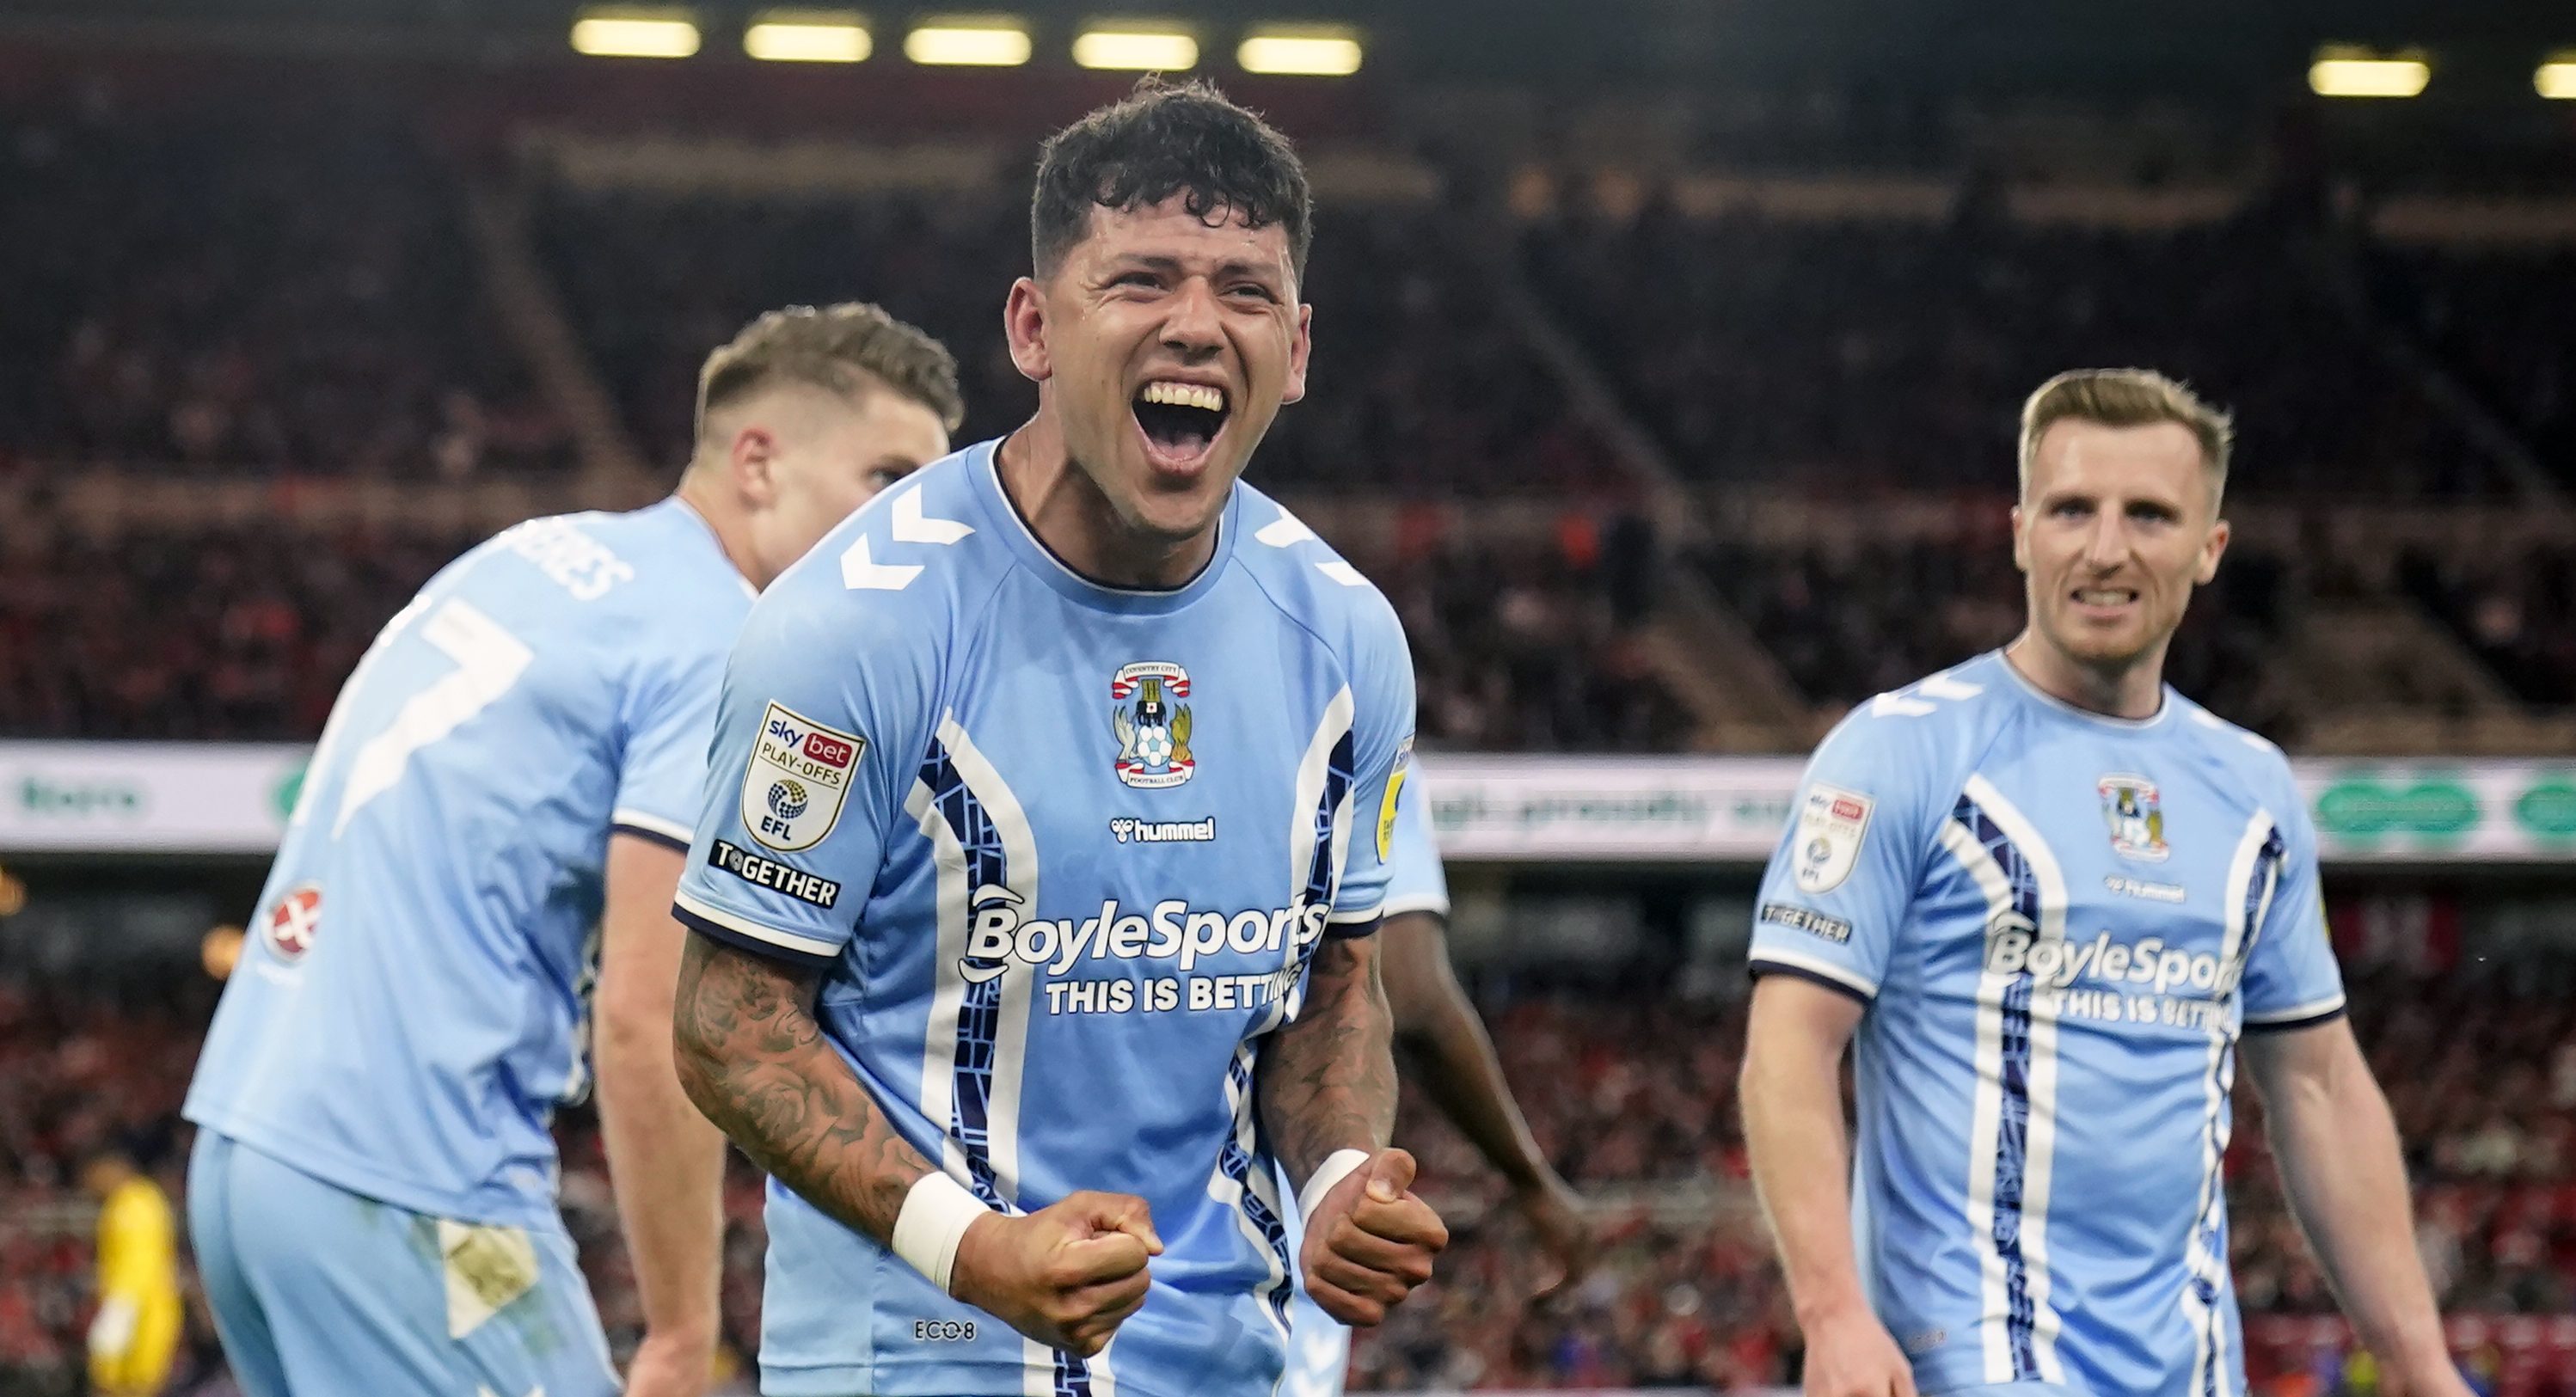 Watch Sky Bet Championship 2023-24 in USA [Free Streaming]